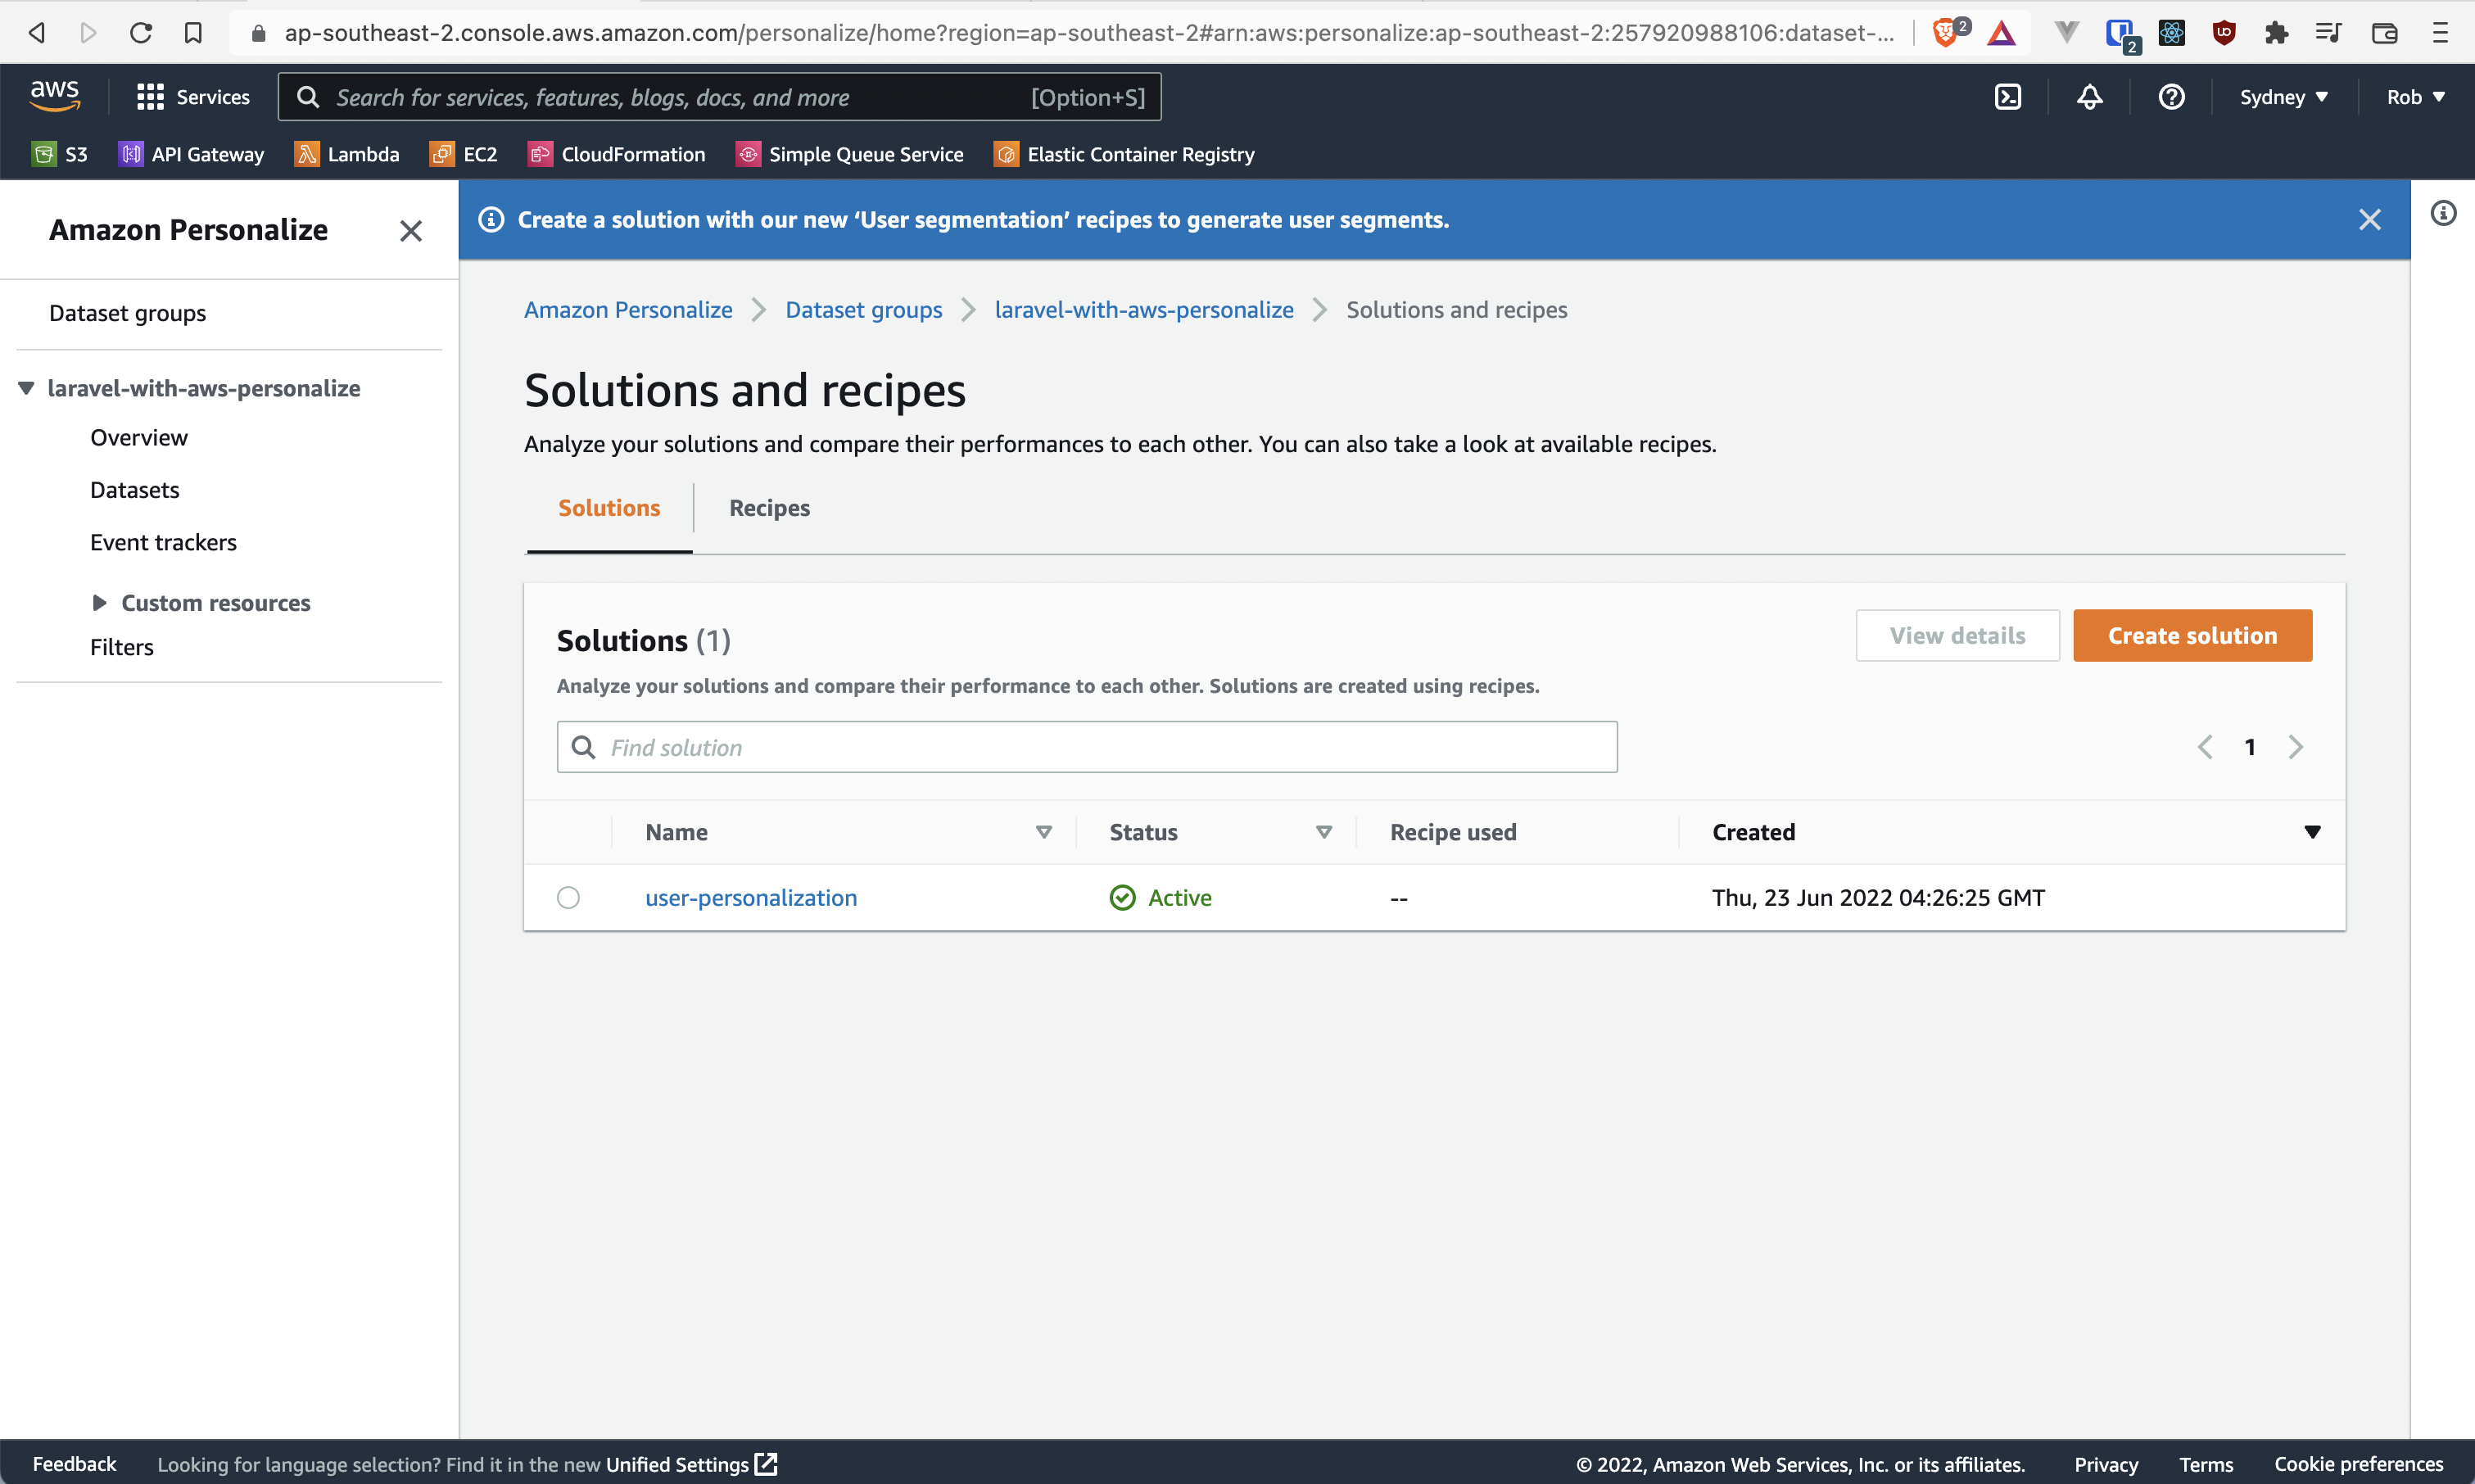 AWS Personalize Solution Overview